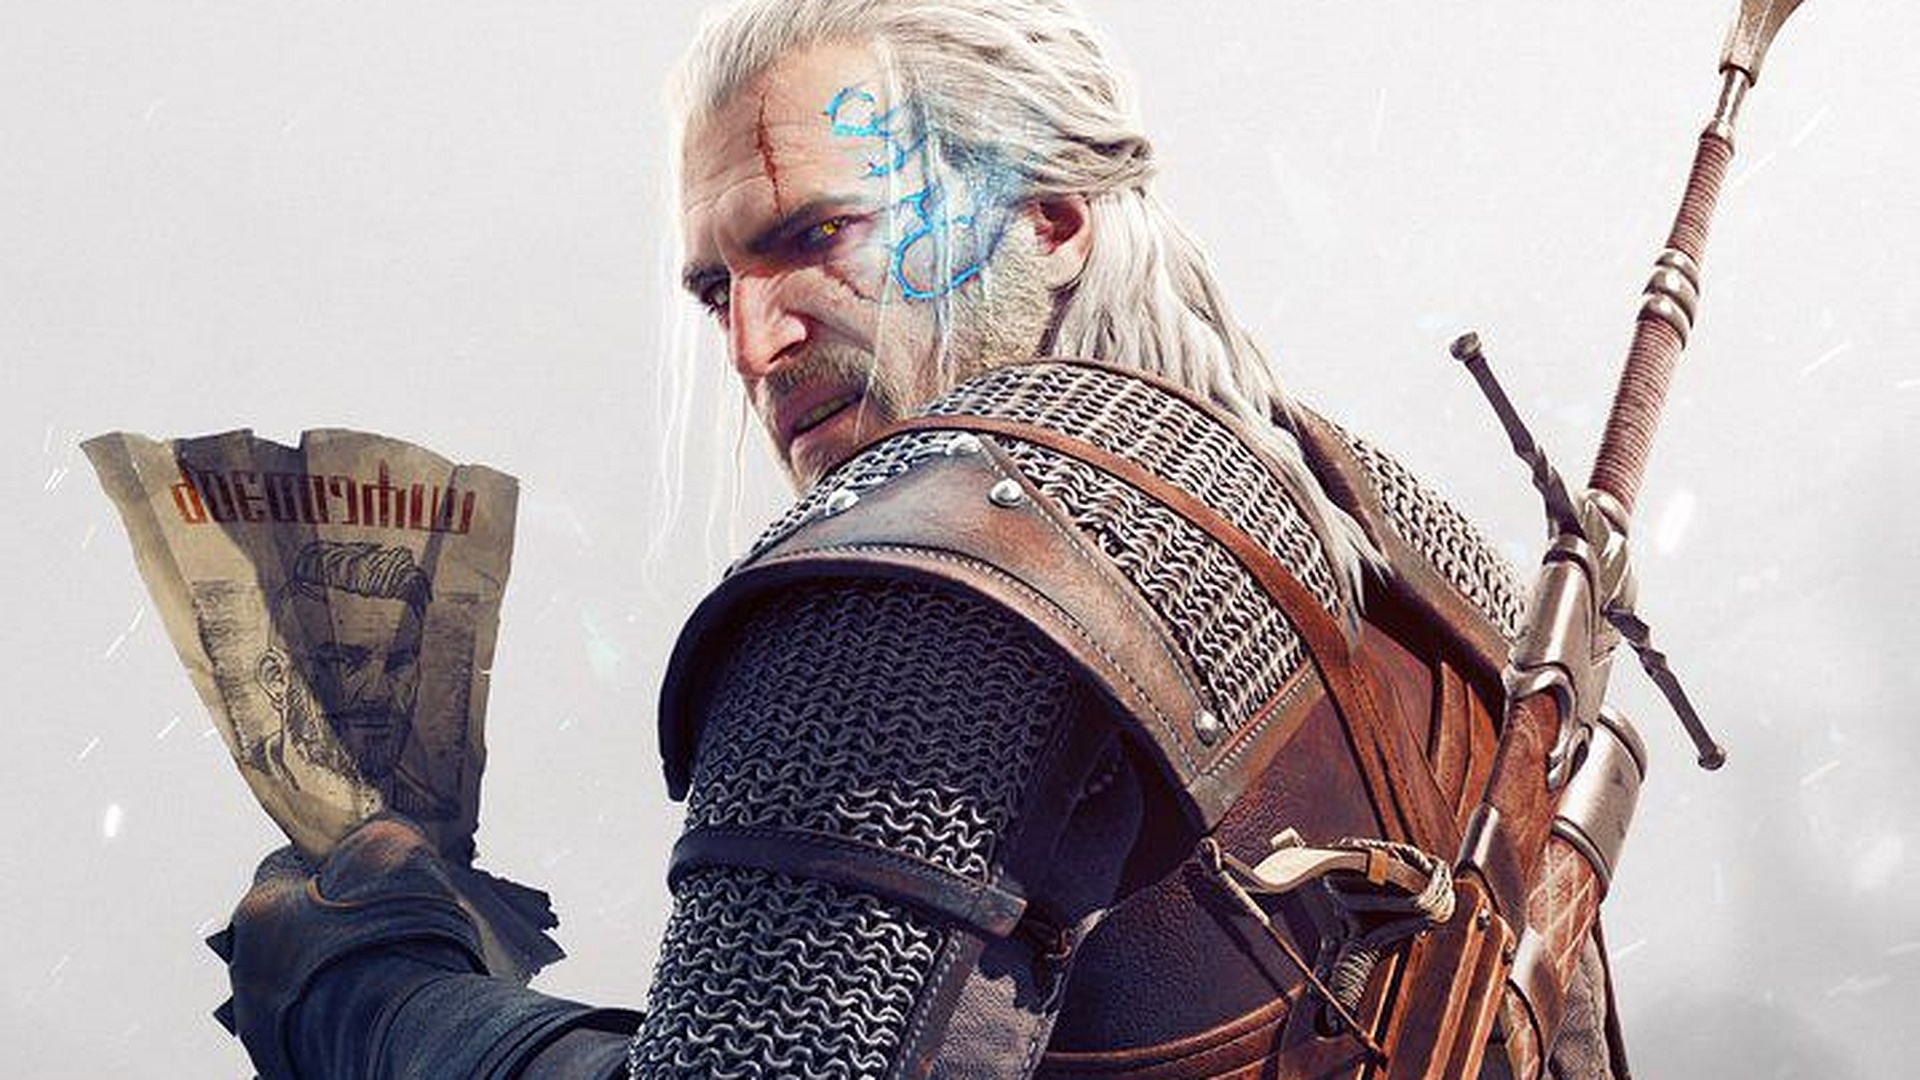 Witcher without Geralt: Prequel tells the Background Story as a Board Game